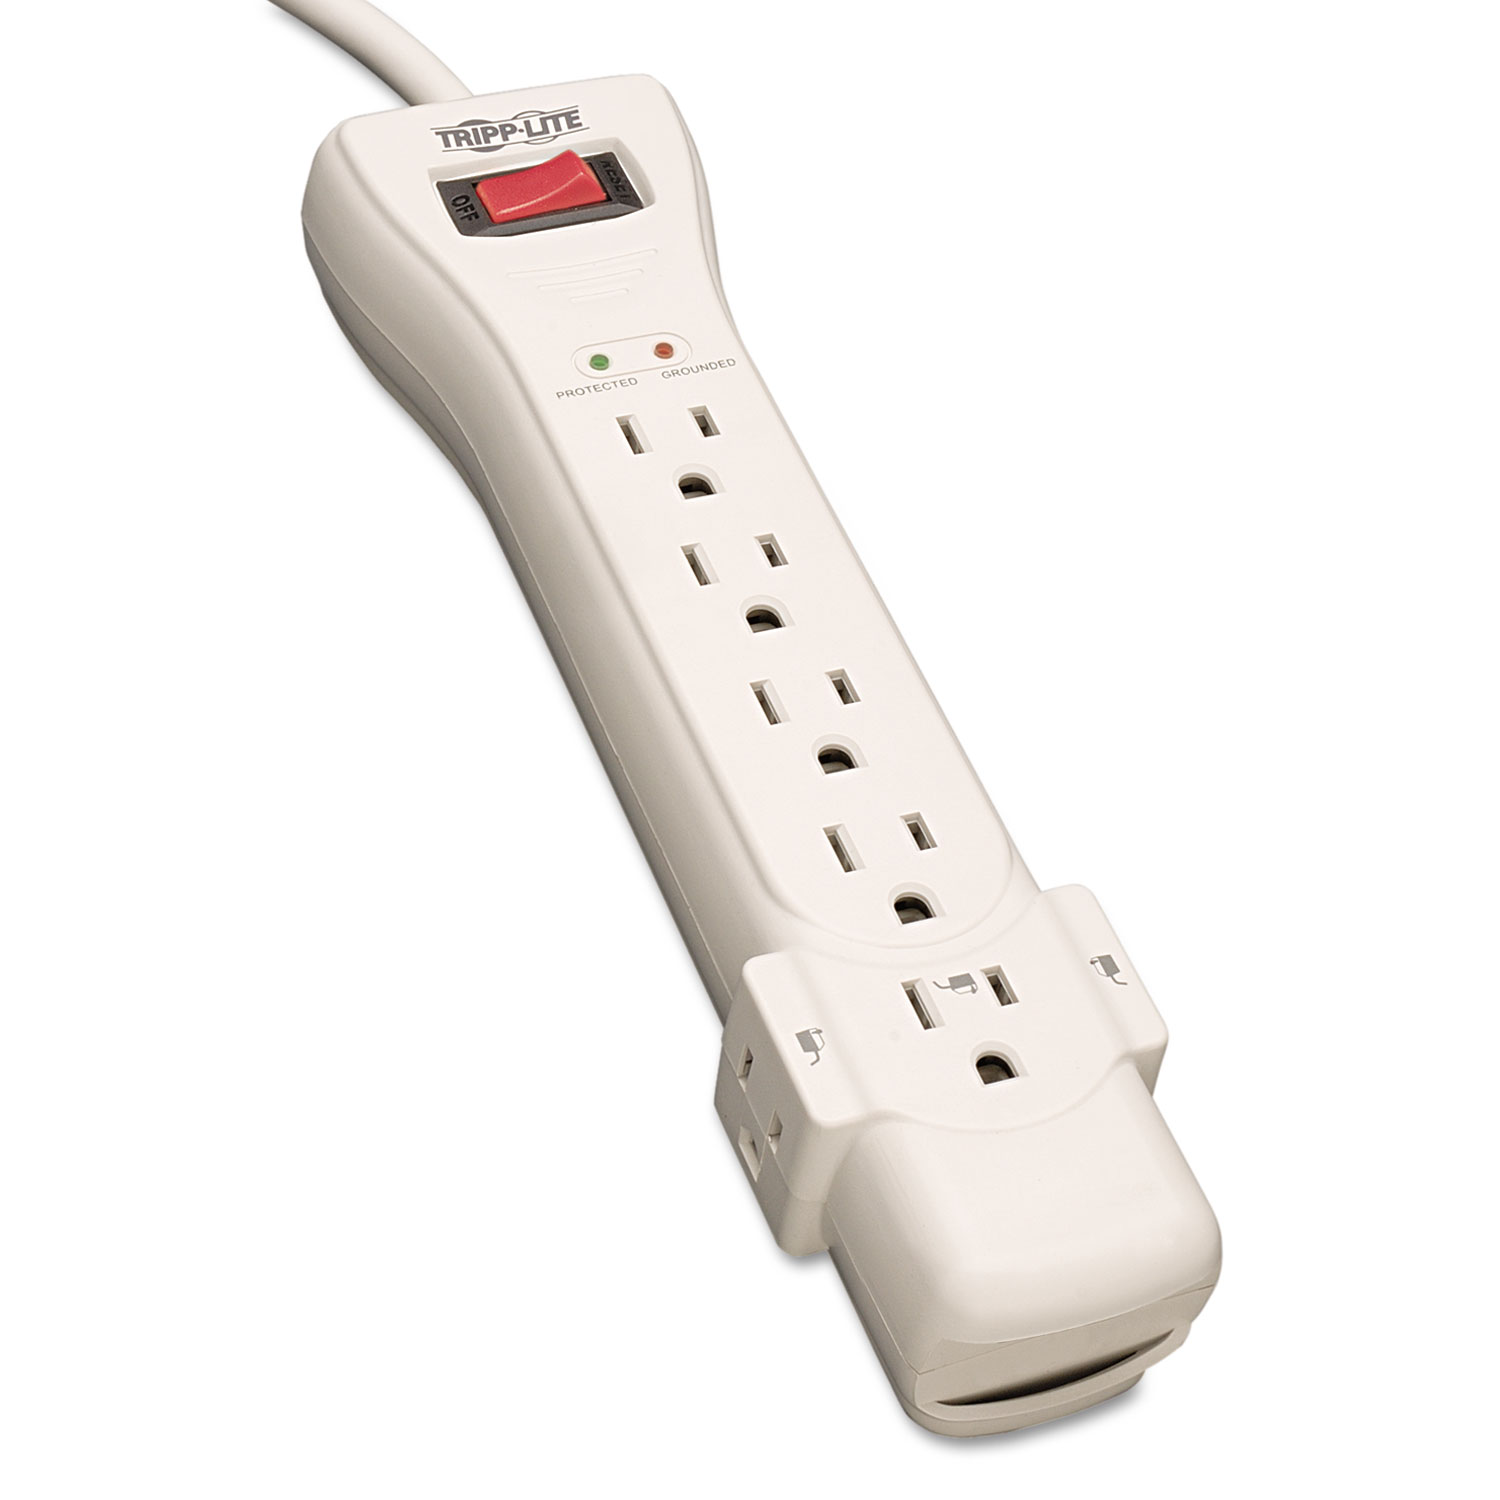 How To Tell If I Have A Surge Protector